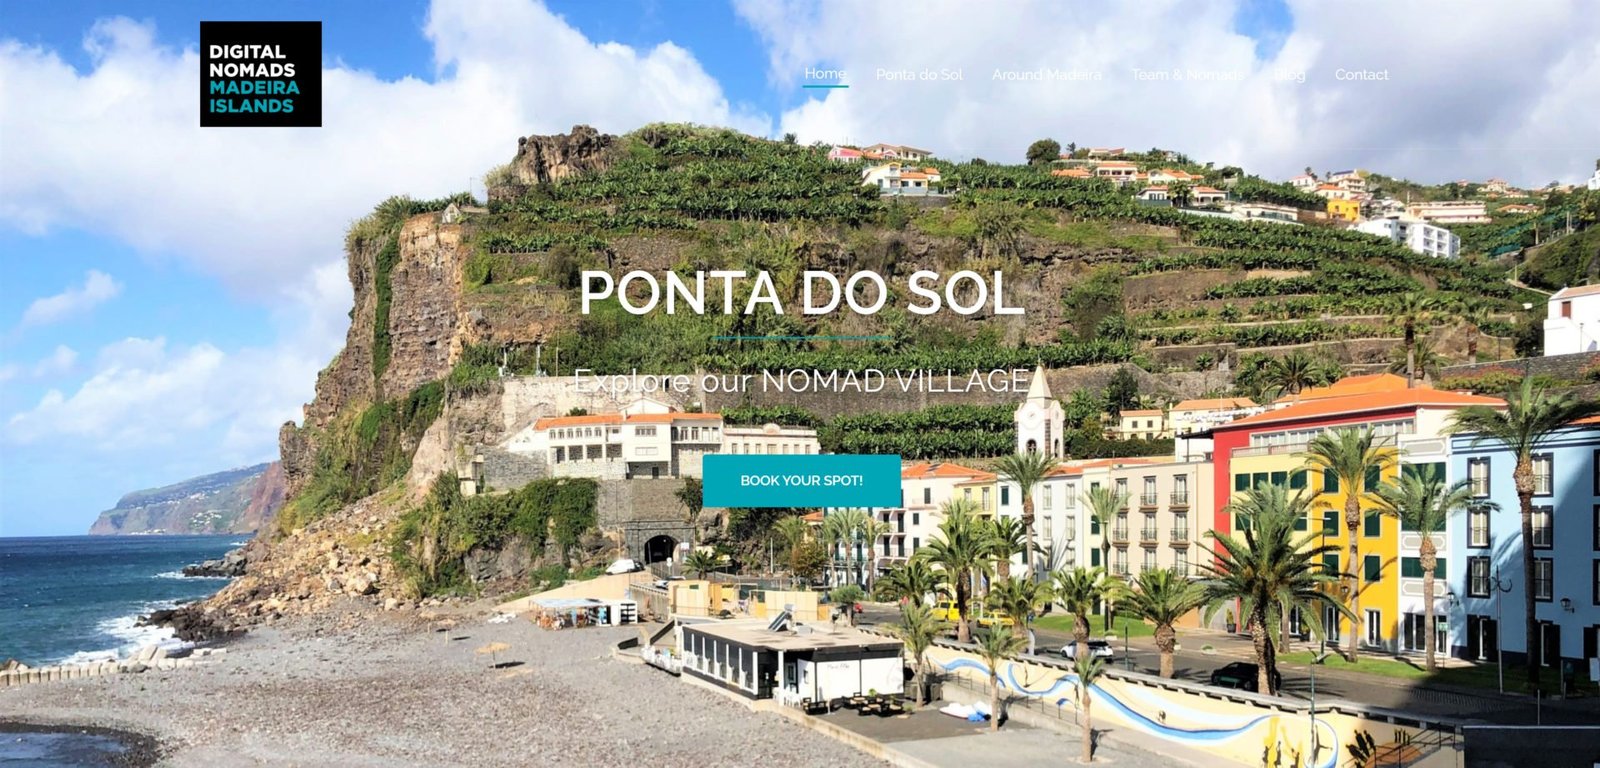 «Digital Nomads» is Attracting Hundreds Workers to Madeira